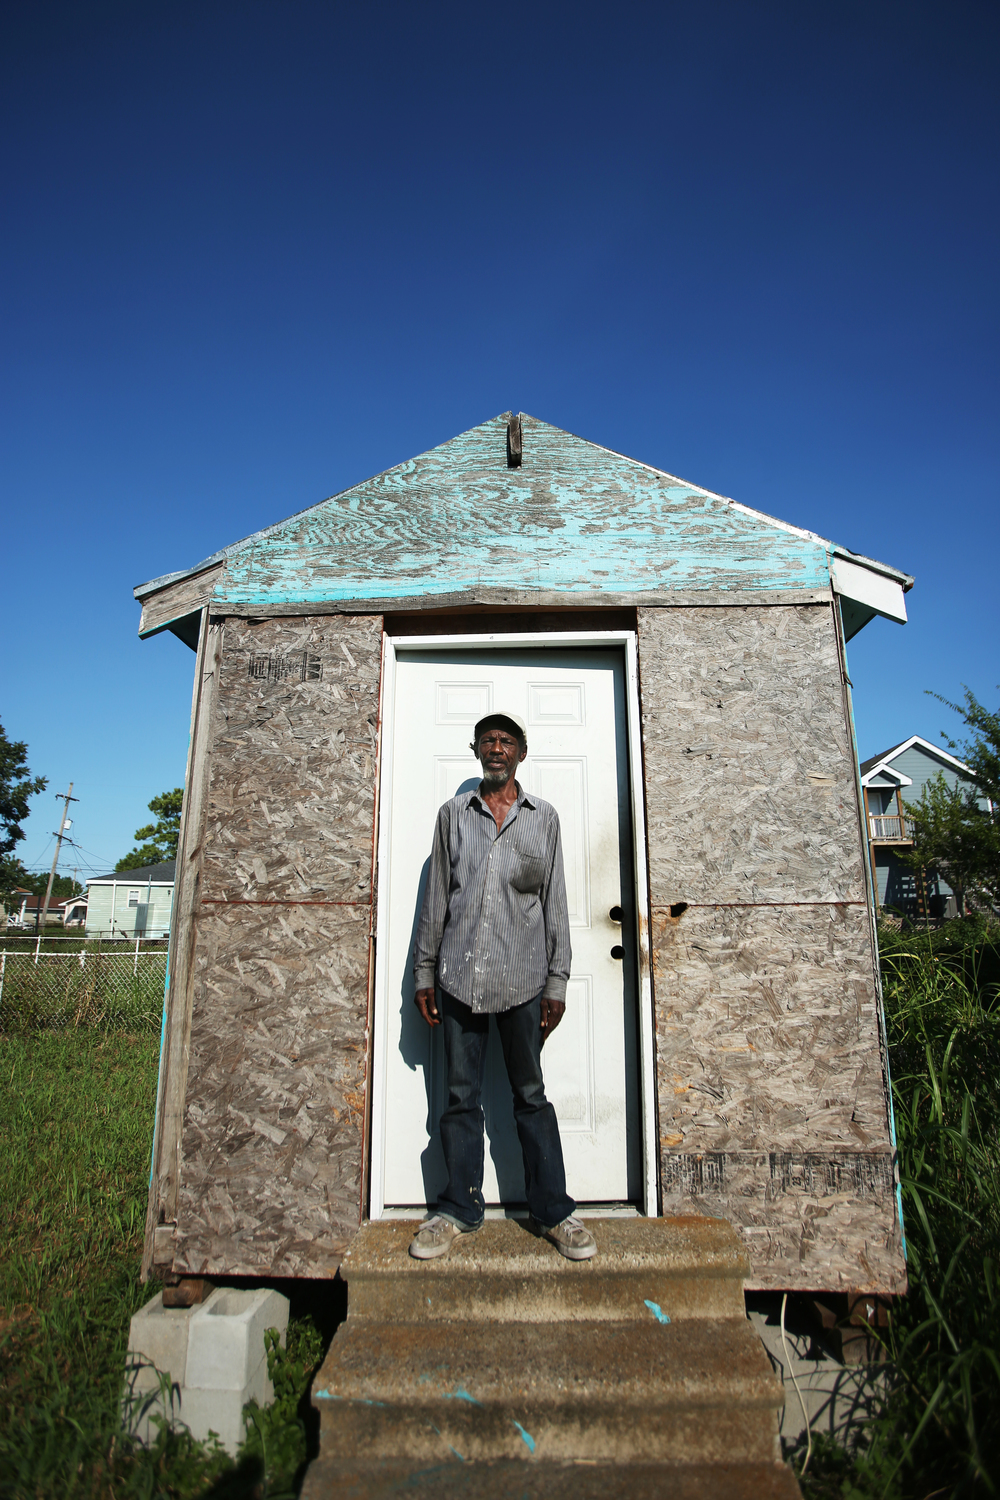  Ronnie Brown  Lower Ninth Ward  New Orleans, Louisiana  August 2015 